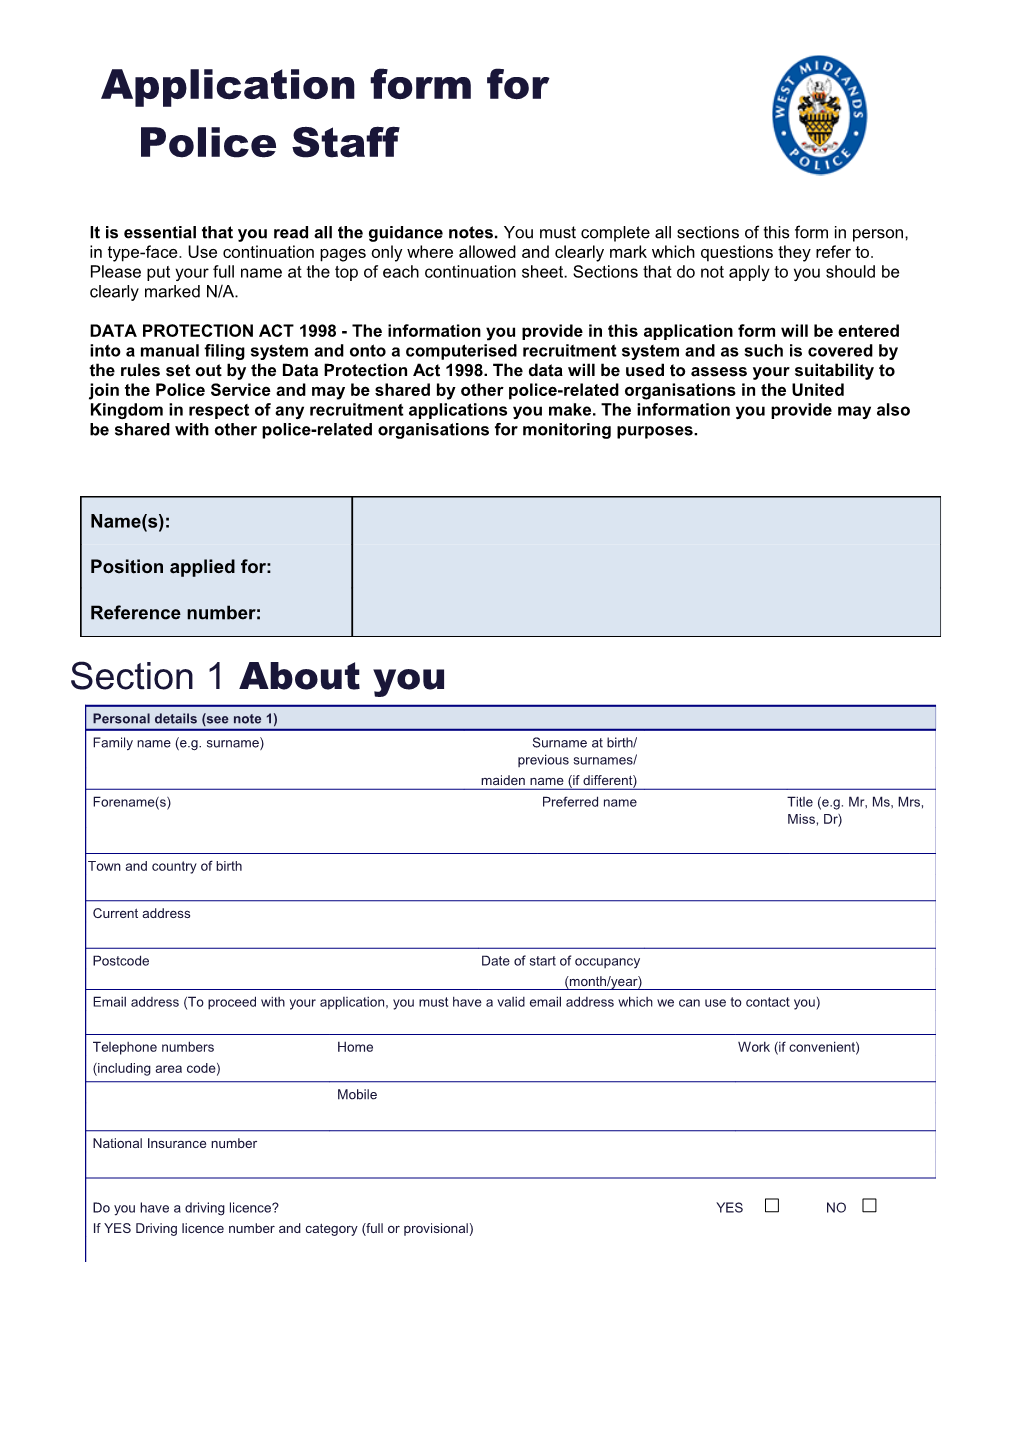 Application Form for Appointment in a Police Staff Role